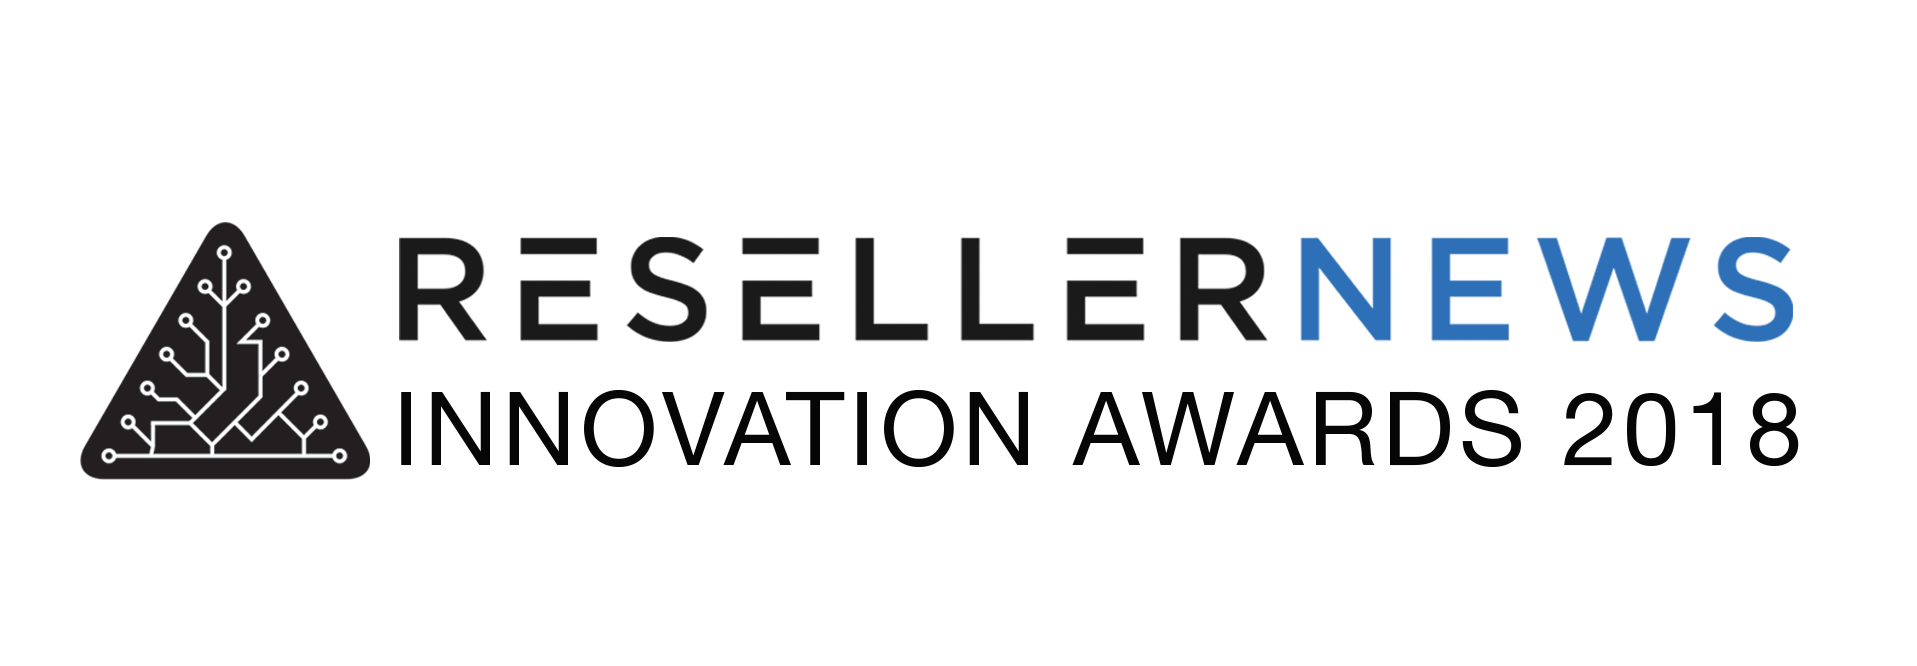 Reseller News Innovation Awards 2018 - Software Vendor of the Year